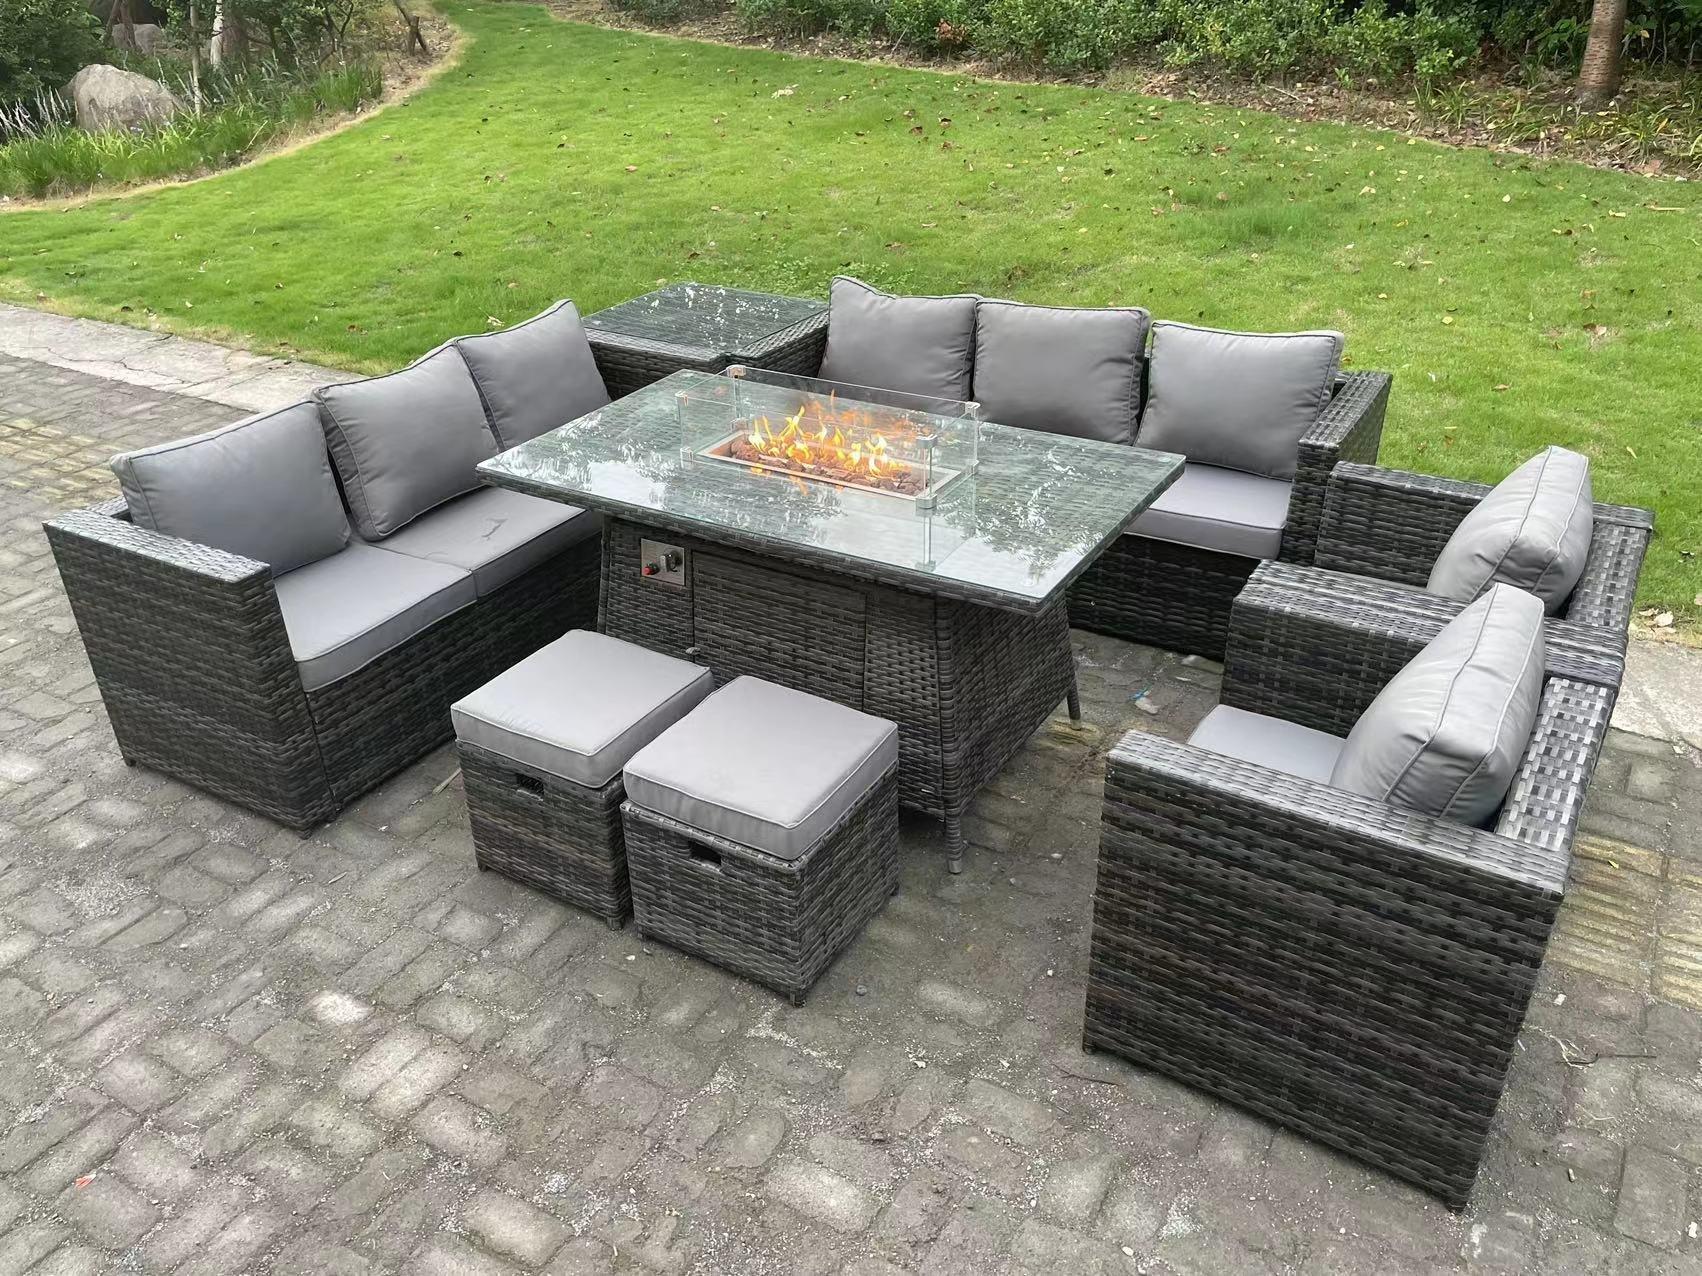 10 Seater Outdoor Rattan Gas Fire Pit Table Heater Lounge Chairs Footstools